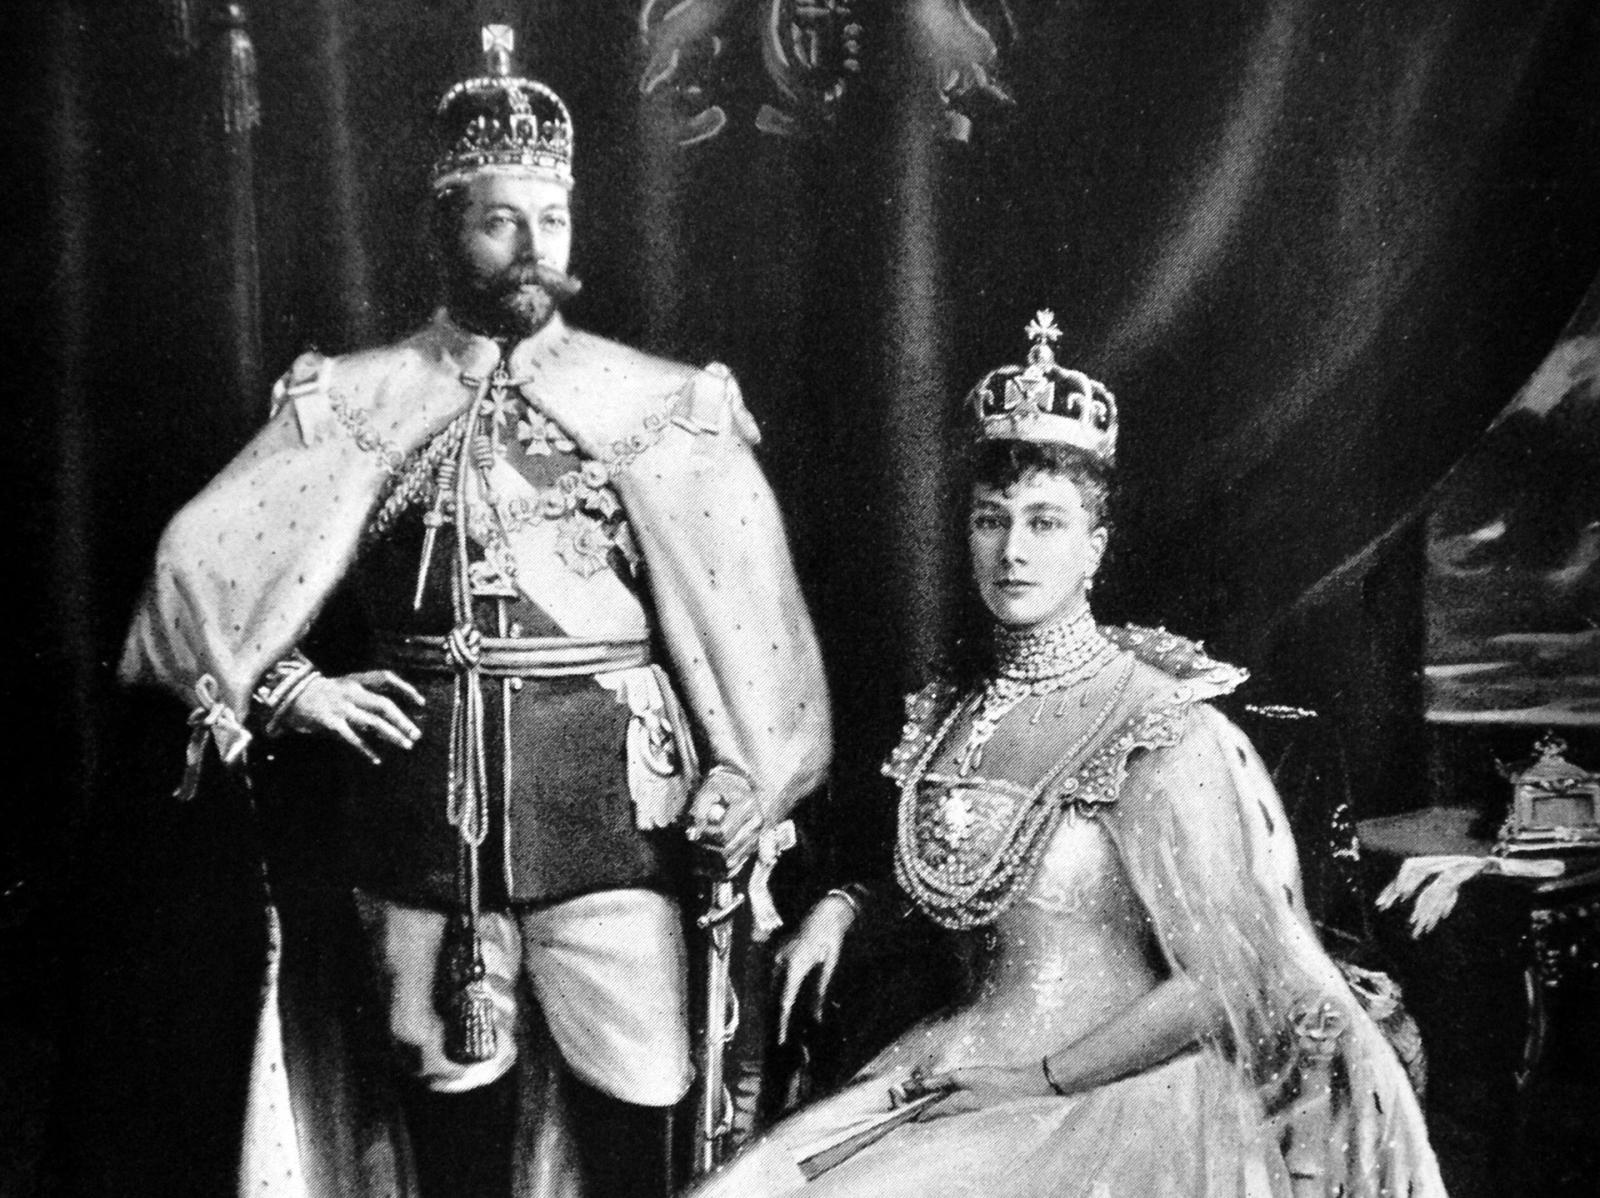 5 Longest Marriages in Royal Family History (No. 5 Lasted 41 years!) - image 1